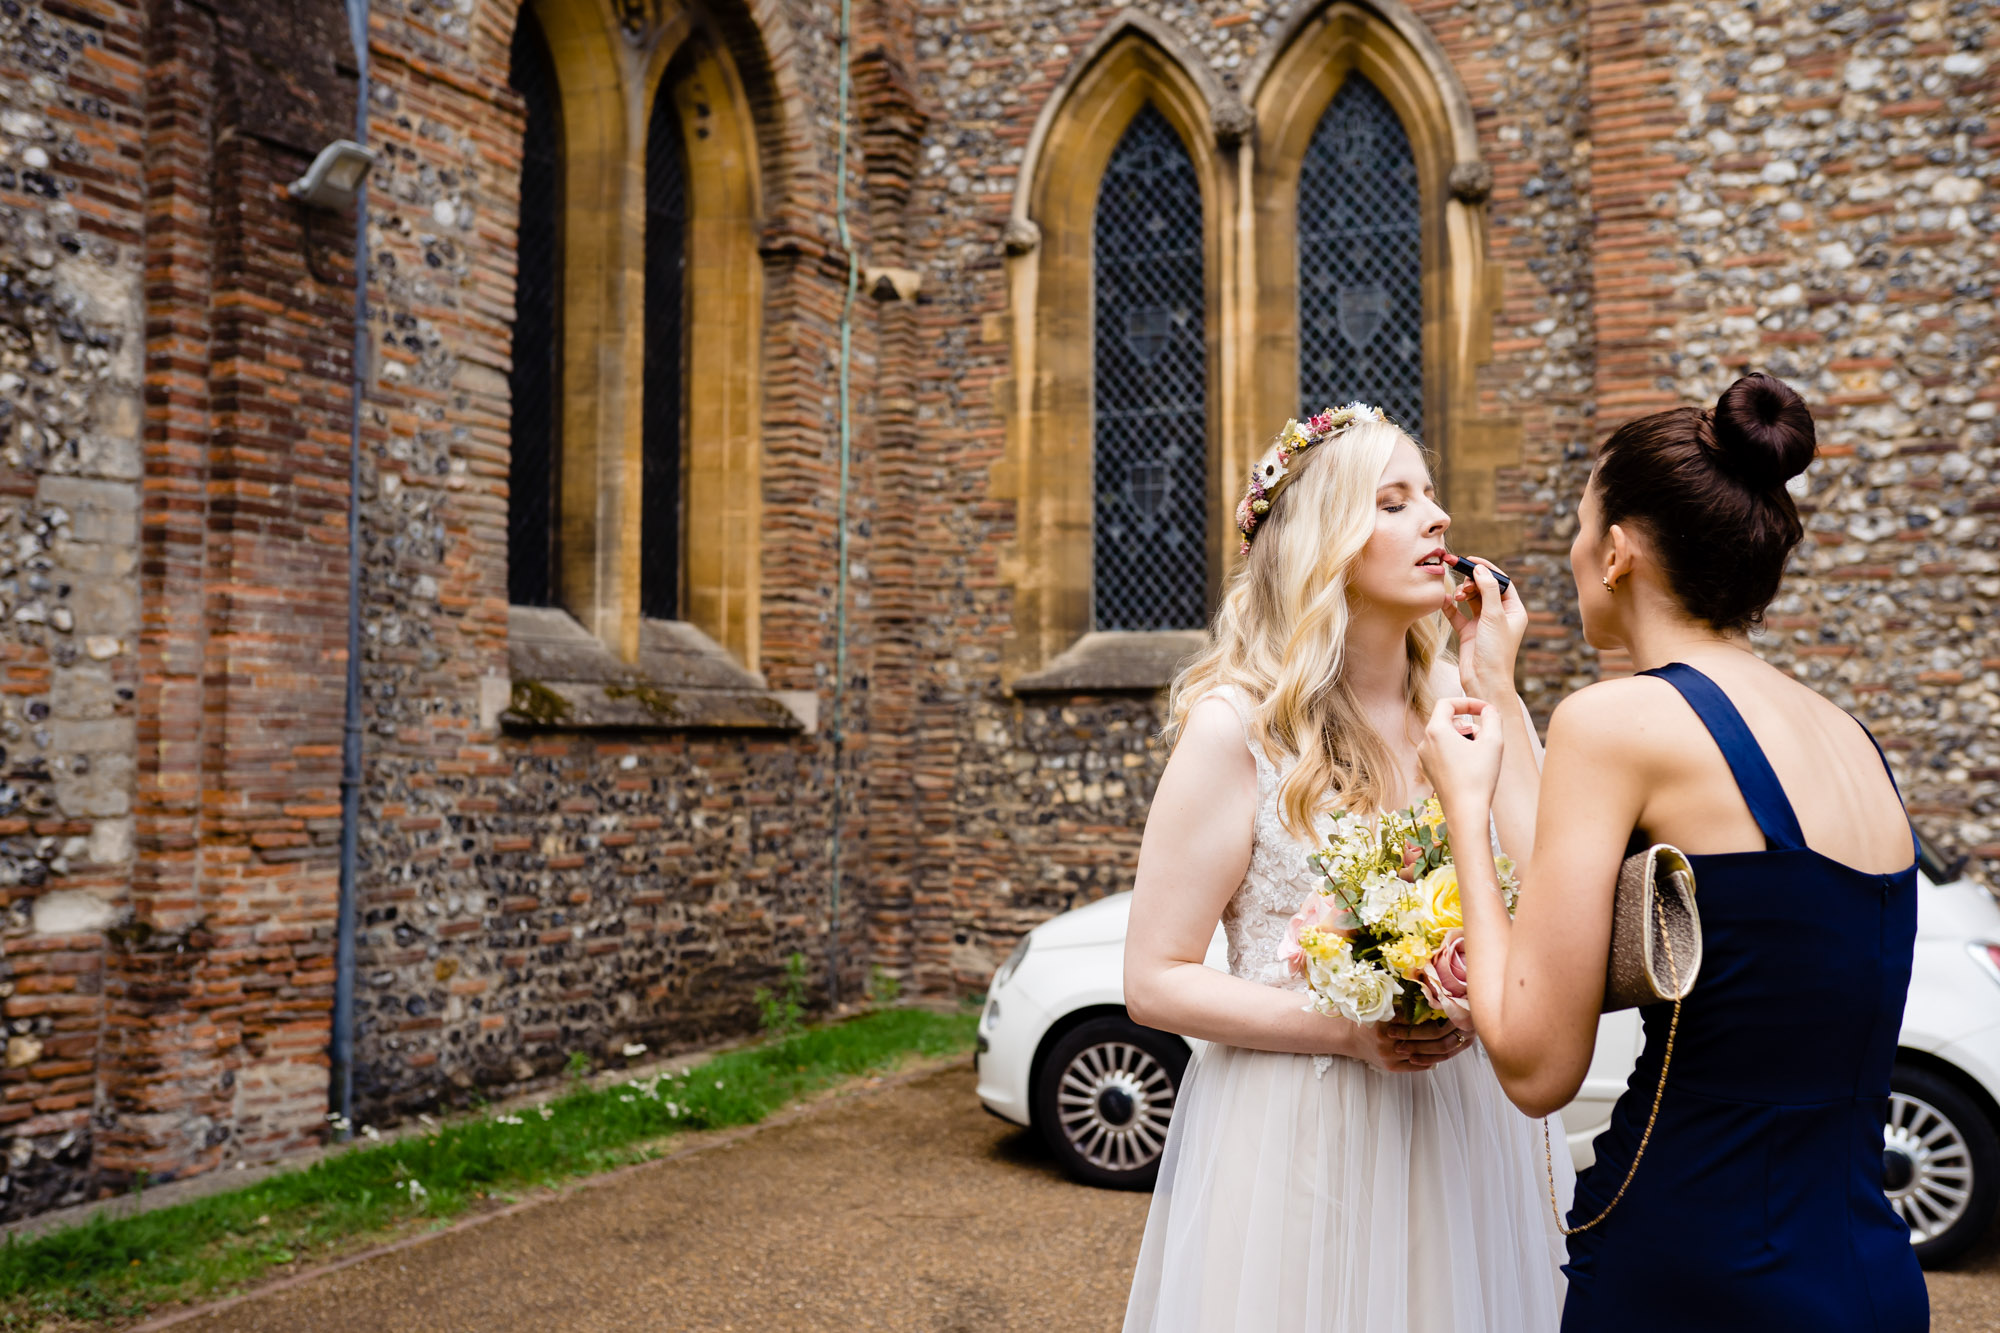 lipstick retouch outside St Albans Cathedral wedding, Hertfordshire  